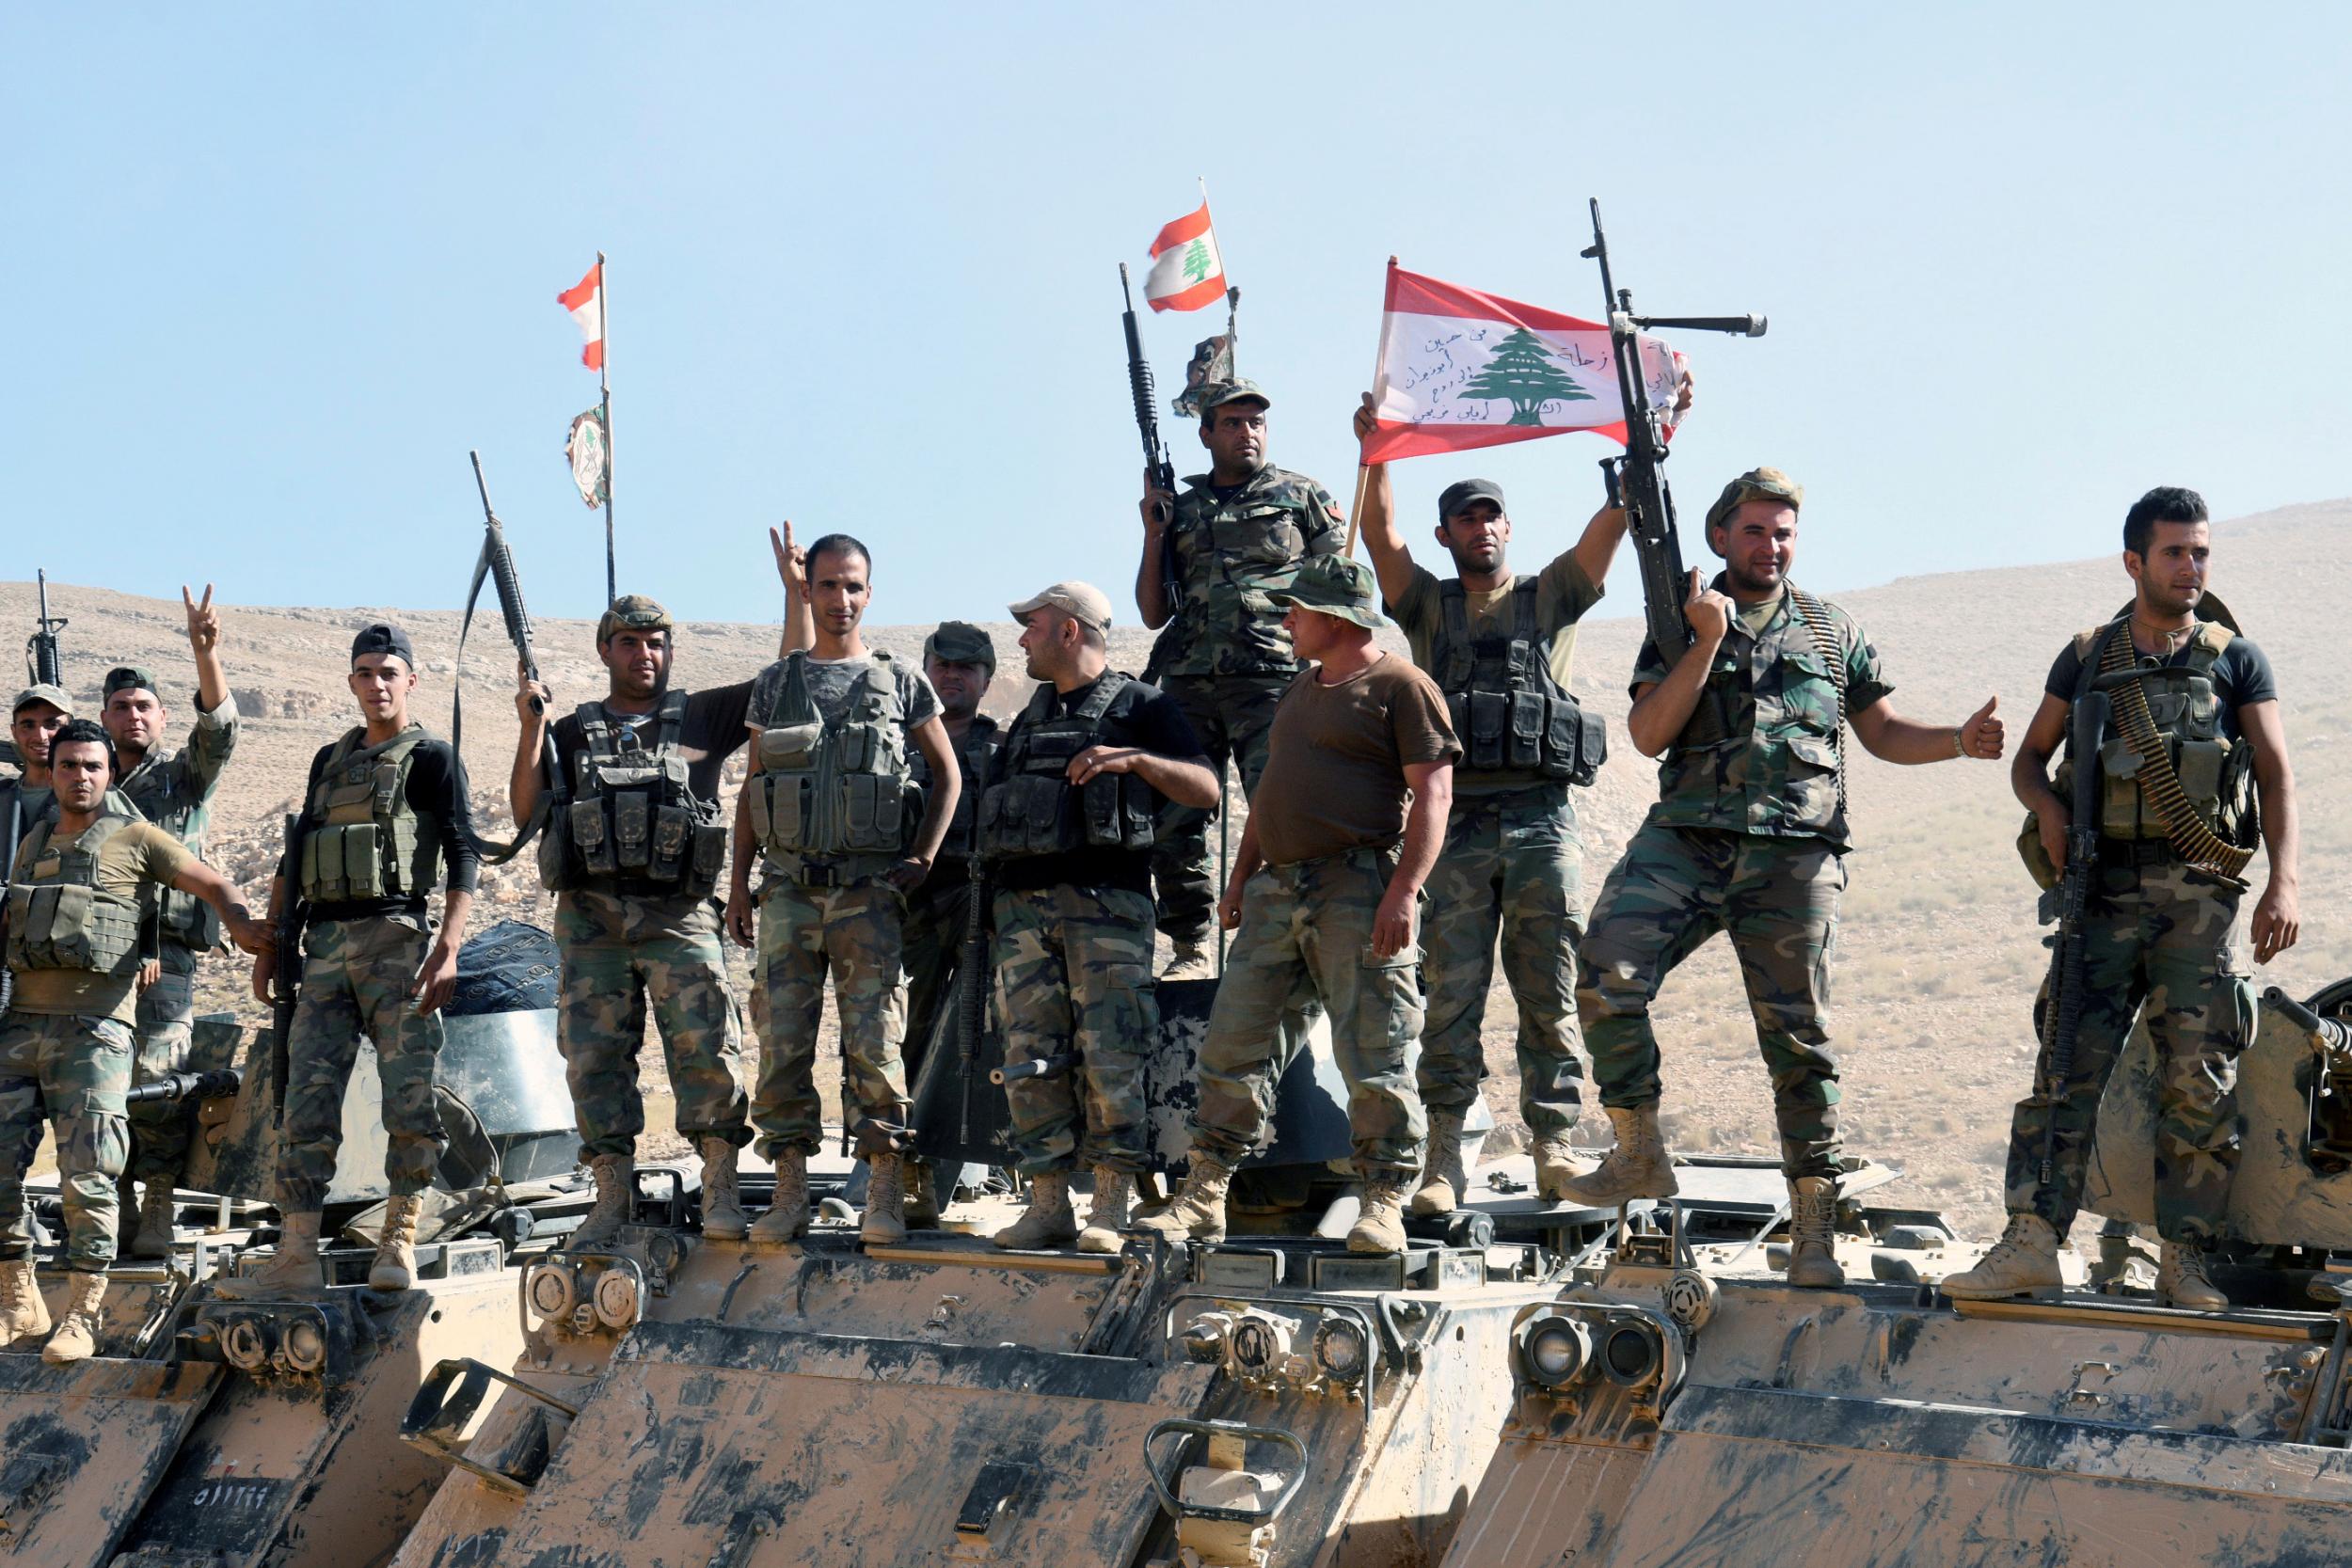 Lebanese Army soldiers flash the victory sign in Ras Baalbek, Lebanon on 28 August 2017